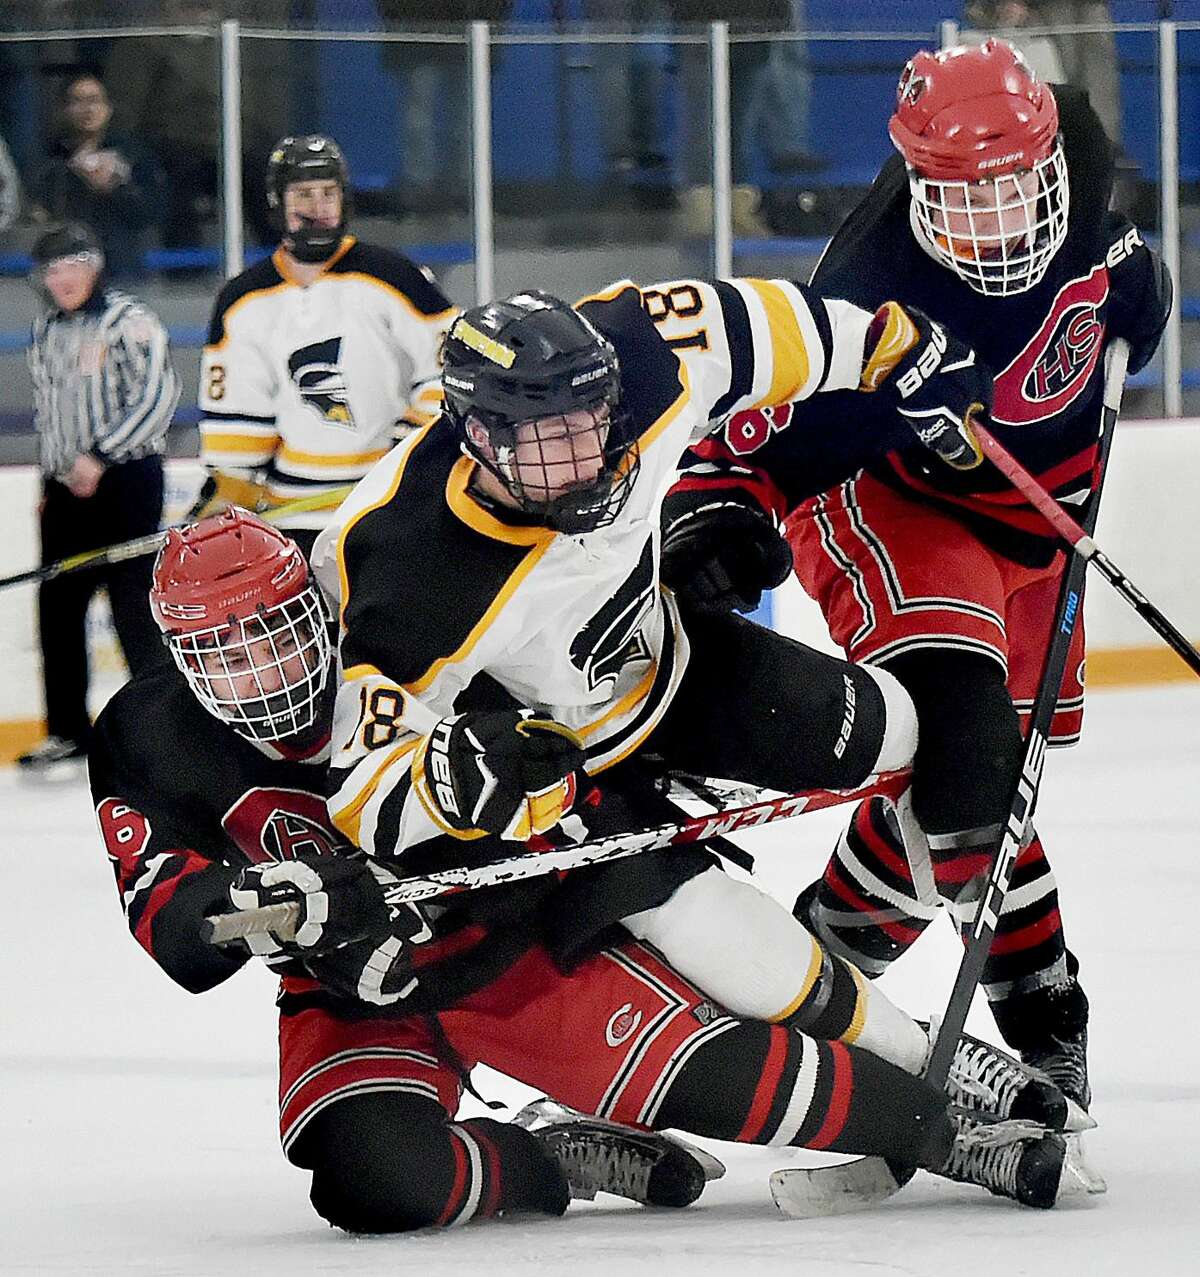 Amity junior forwared Jason Csejka (18) battles Cheshire junior forwards Jason McKinley (6) and Evan Veivia (16), Wednesday, Jan. 31, 2018, at Bennett Rink in West Haven. The Spartans tied the Rams, 4-4 in regulation, and a scoreless overtime.